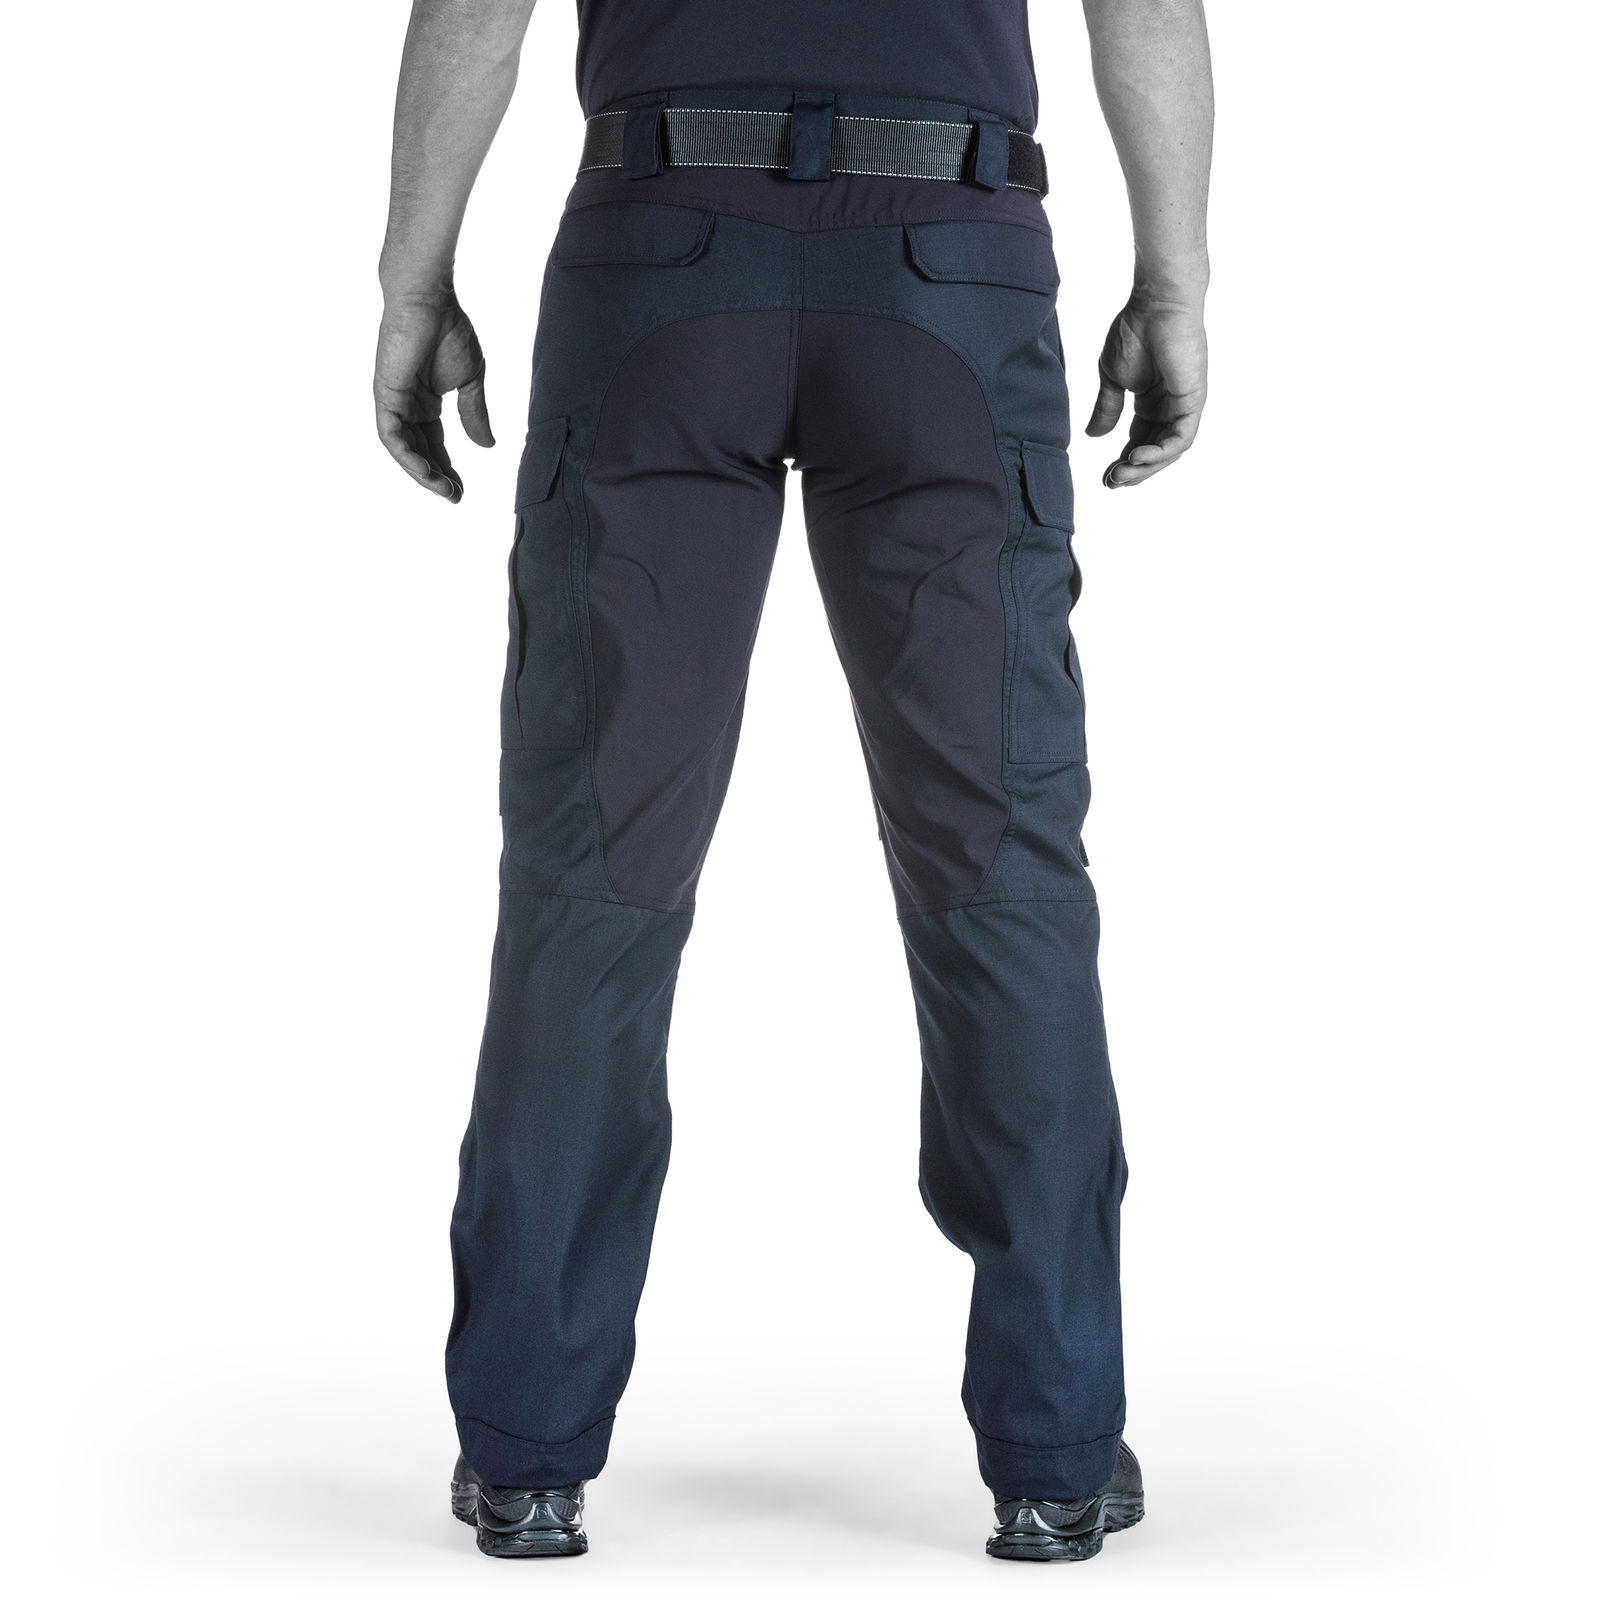 Propper Kinetic Tactical Pants 3630 LAPD BLUE NWT  Full On Cinema